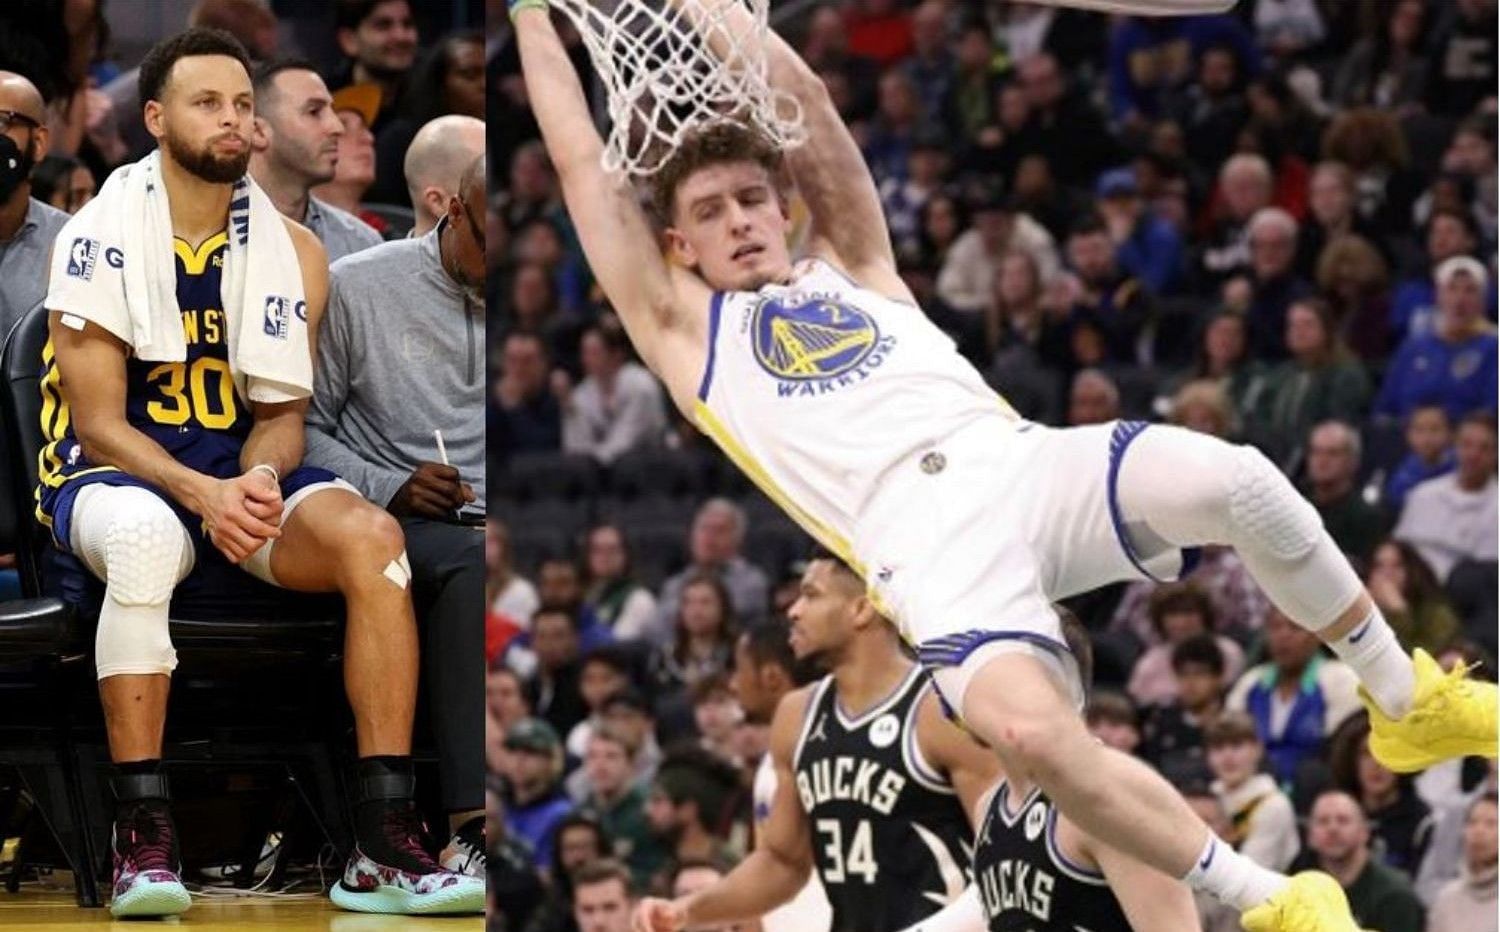 Golden State Warriors fans saw positives in the play of rookie Brandin Podziemski (R) in the absence of Steph Curry on Saturday against the Milwaukee Bucks.